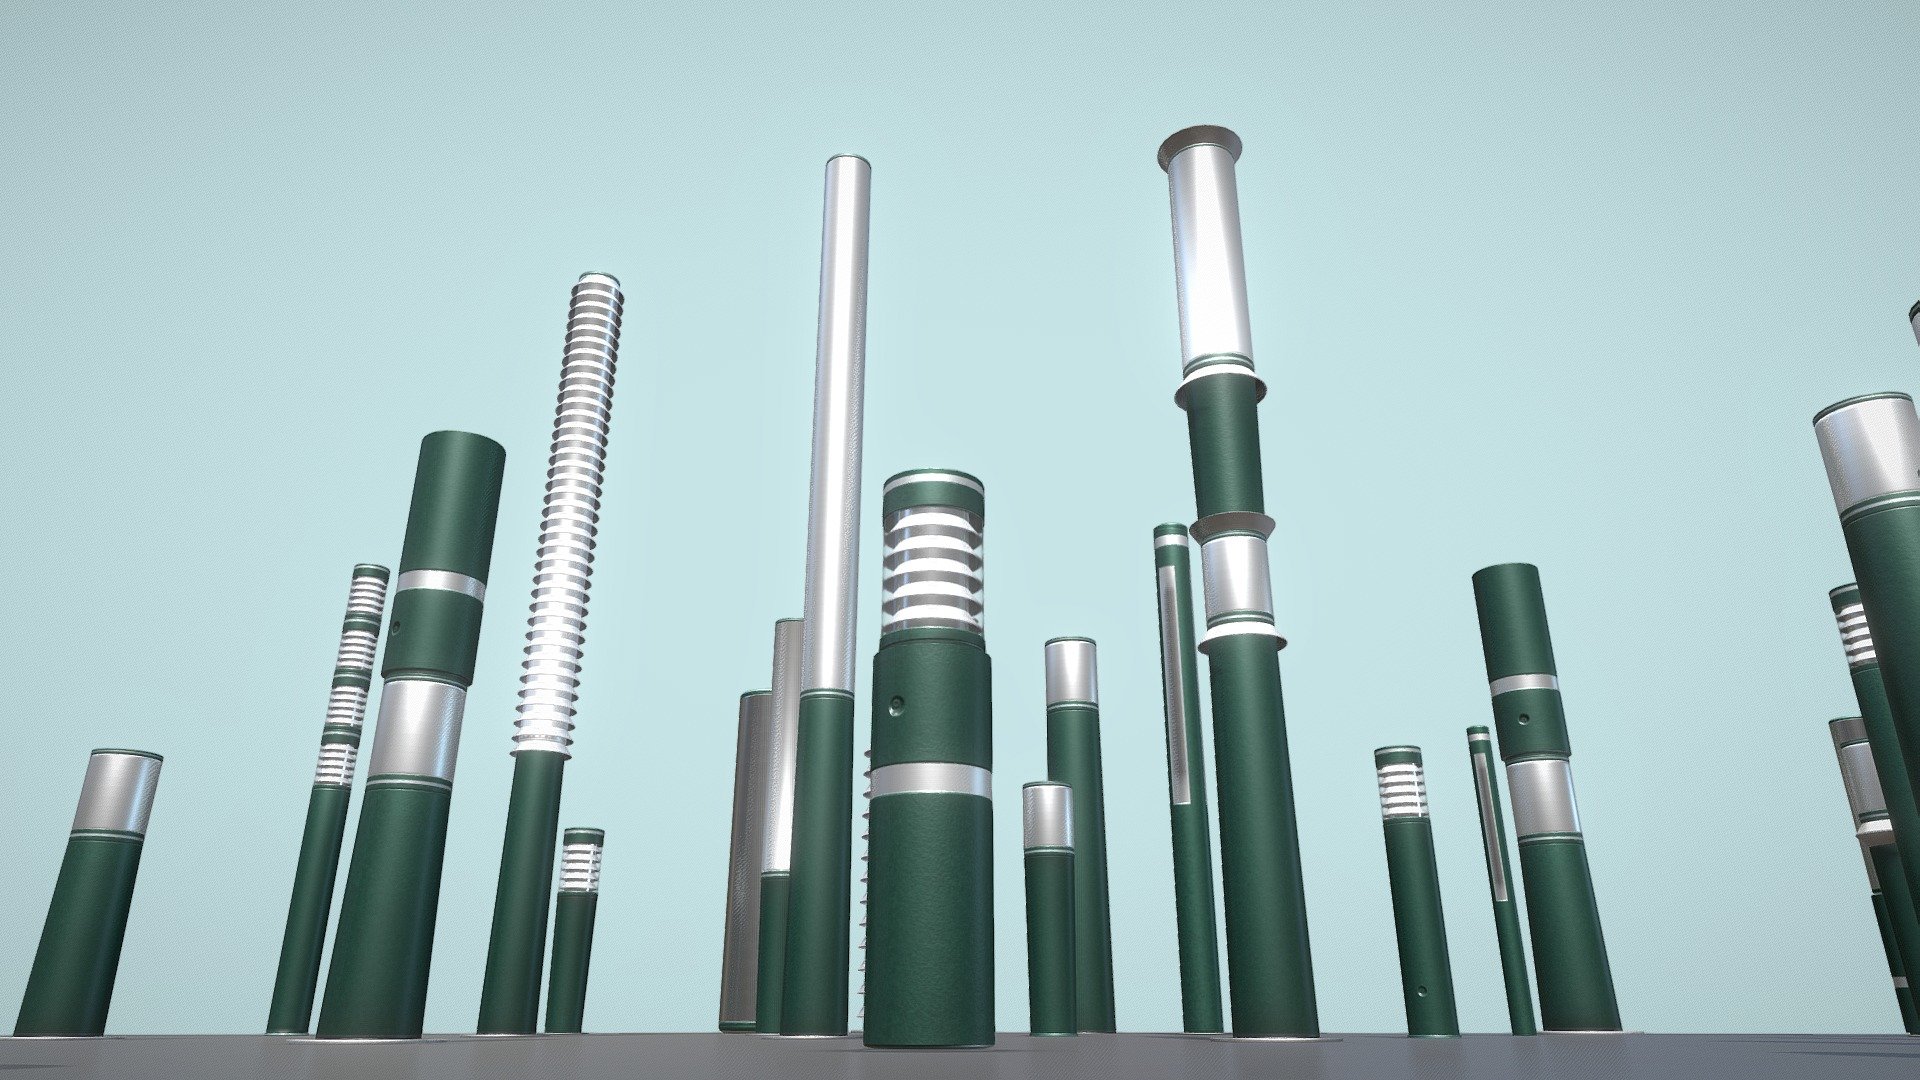 Here are 30 different types of low-poly light columns.
The moss green version!




High-Poly Version (Total triangles 153.7k)

Street Light (9) Light Columns Basic (Low-Poly)

Street Light (9) Light Columns Blue (Low-Poly)

**Here are some other street lights: **




Street Light (1) Station Clock (High-Poly)

Street Light (2) Wall-Version (High-Poly)

Street Light (3) (Low-Poly Version)

Street Light (4) (High-Poly Version)

Street Light (5) High-Poly Version 

Street Light (7) (Basic Low-Poly Version)

Street Light (8) Light Bollard Basic



Modeled and textured by 3DHaupt in Blender-3D - Street Light (9) Light Columns Moss Green - Buy Royalty Free 3D model by VIS-All-3D (@VIS-All) 3d model